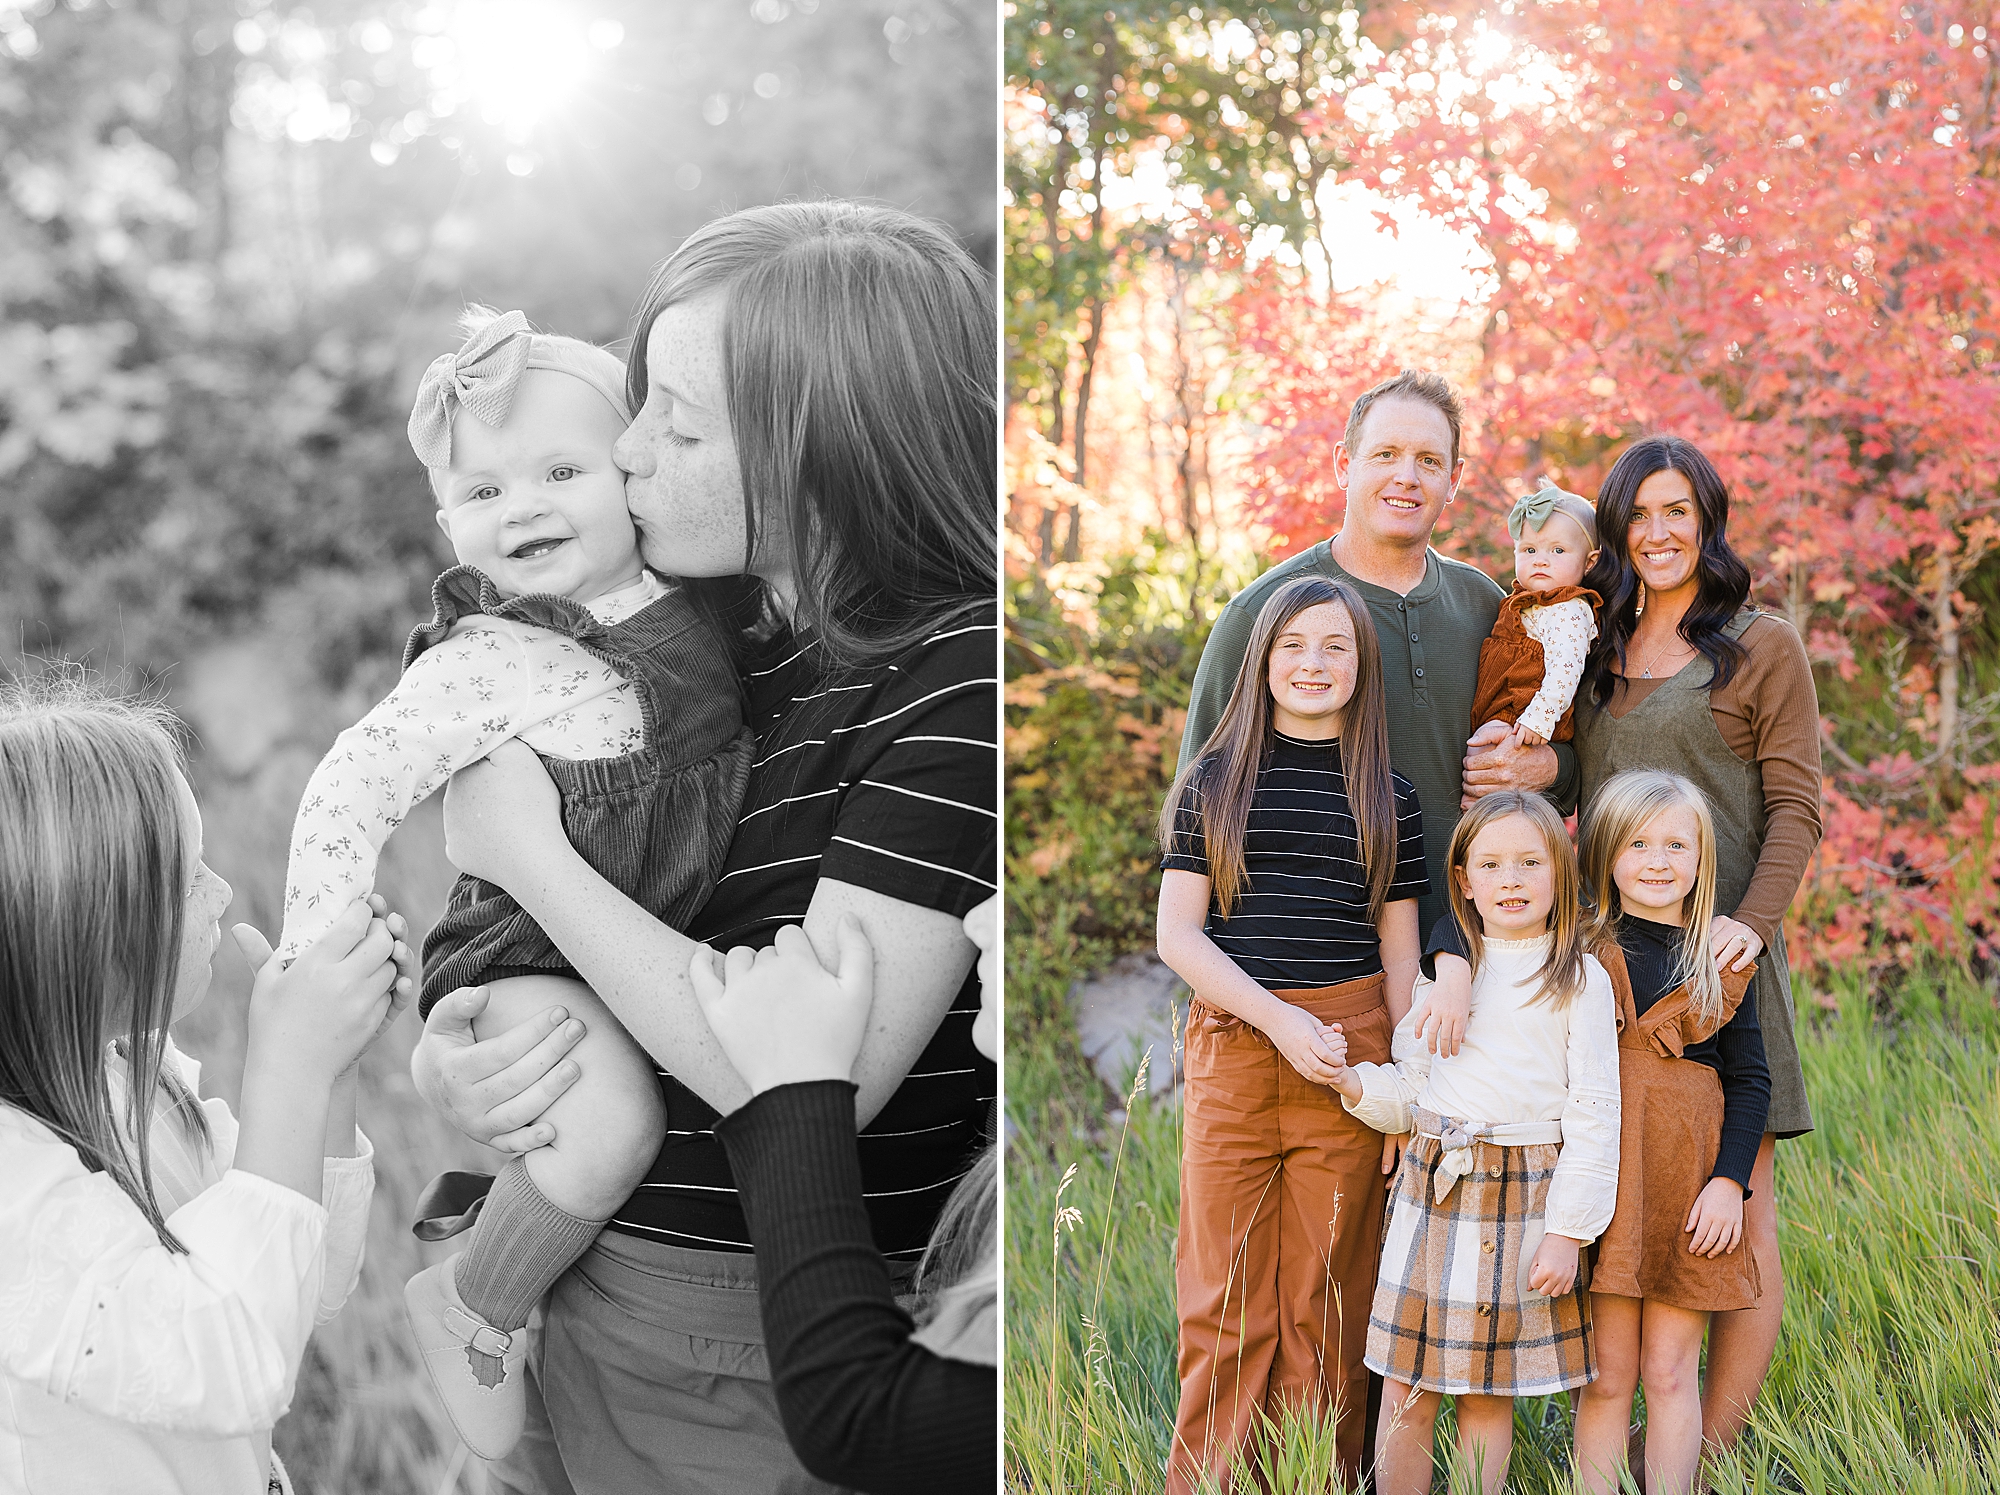 Family photos in the vibrant autumn leaves